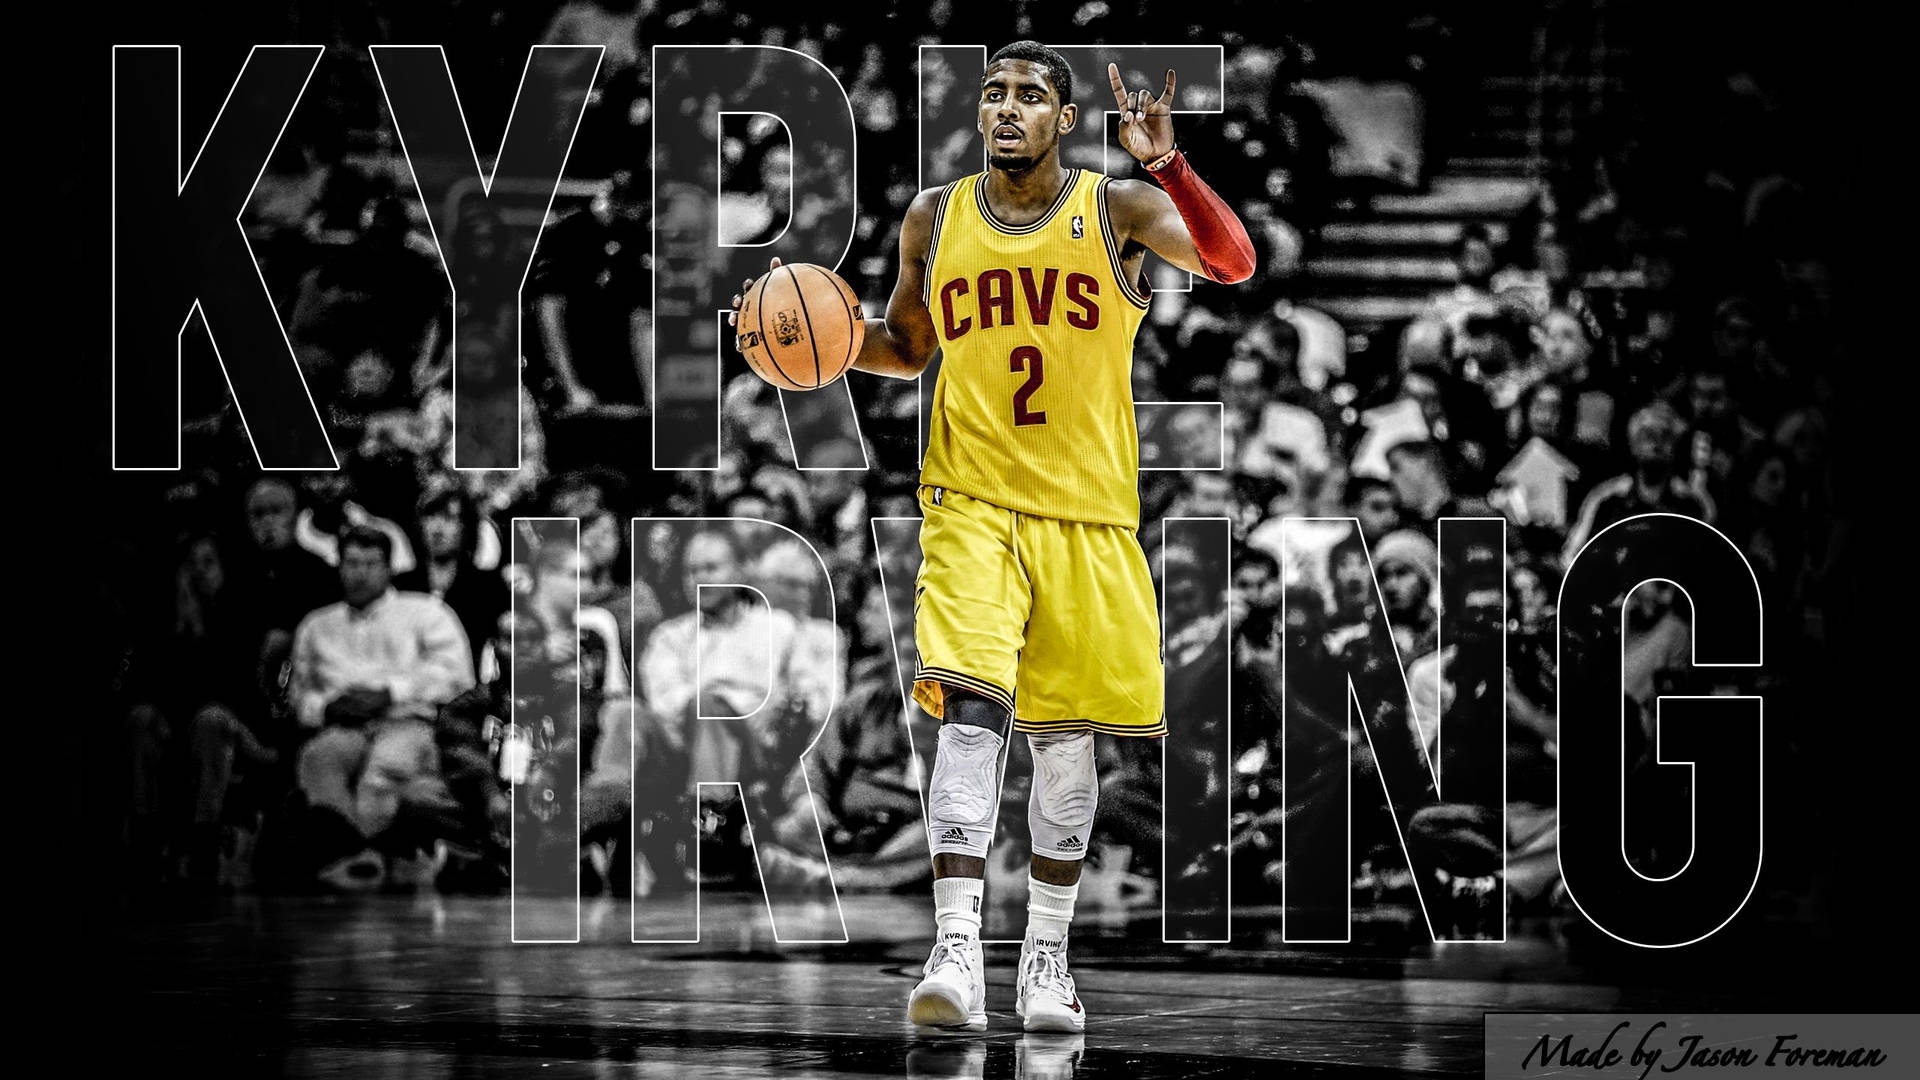 Kyrie Irving 2560X1440 Wallpaper and Background Image